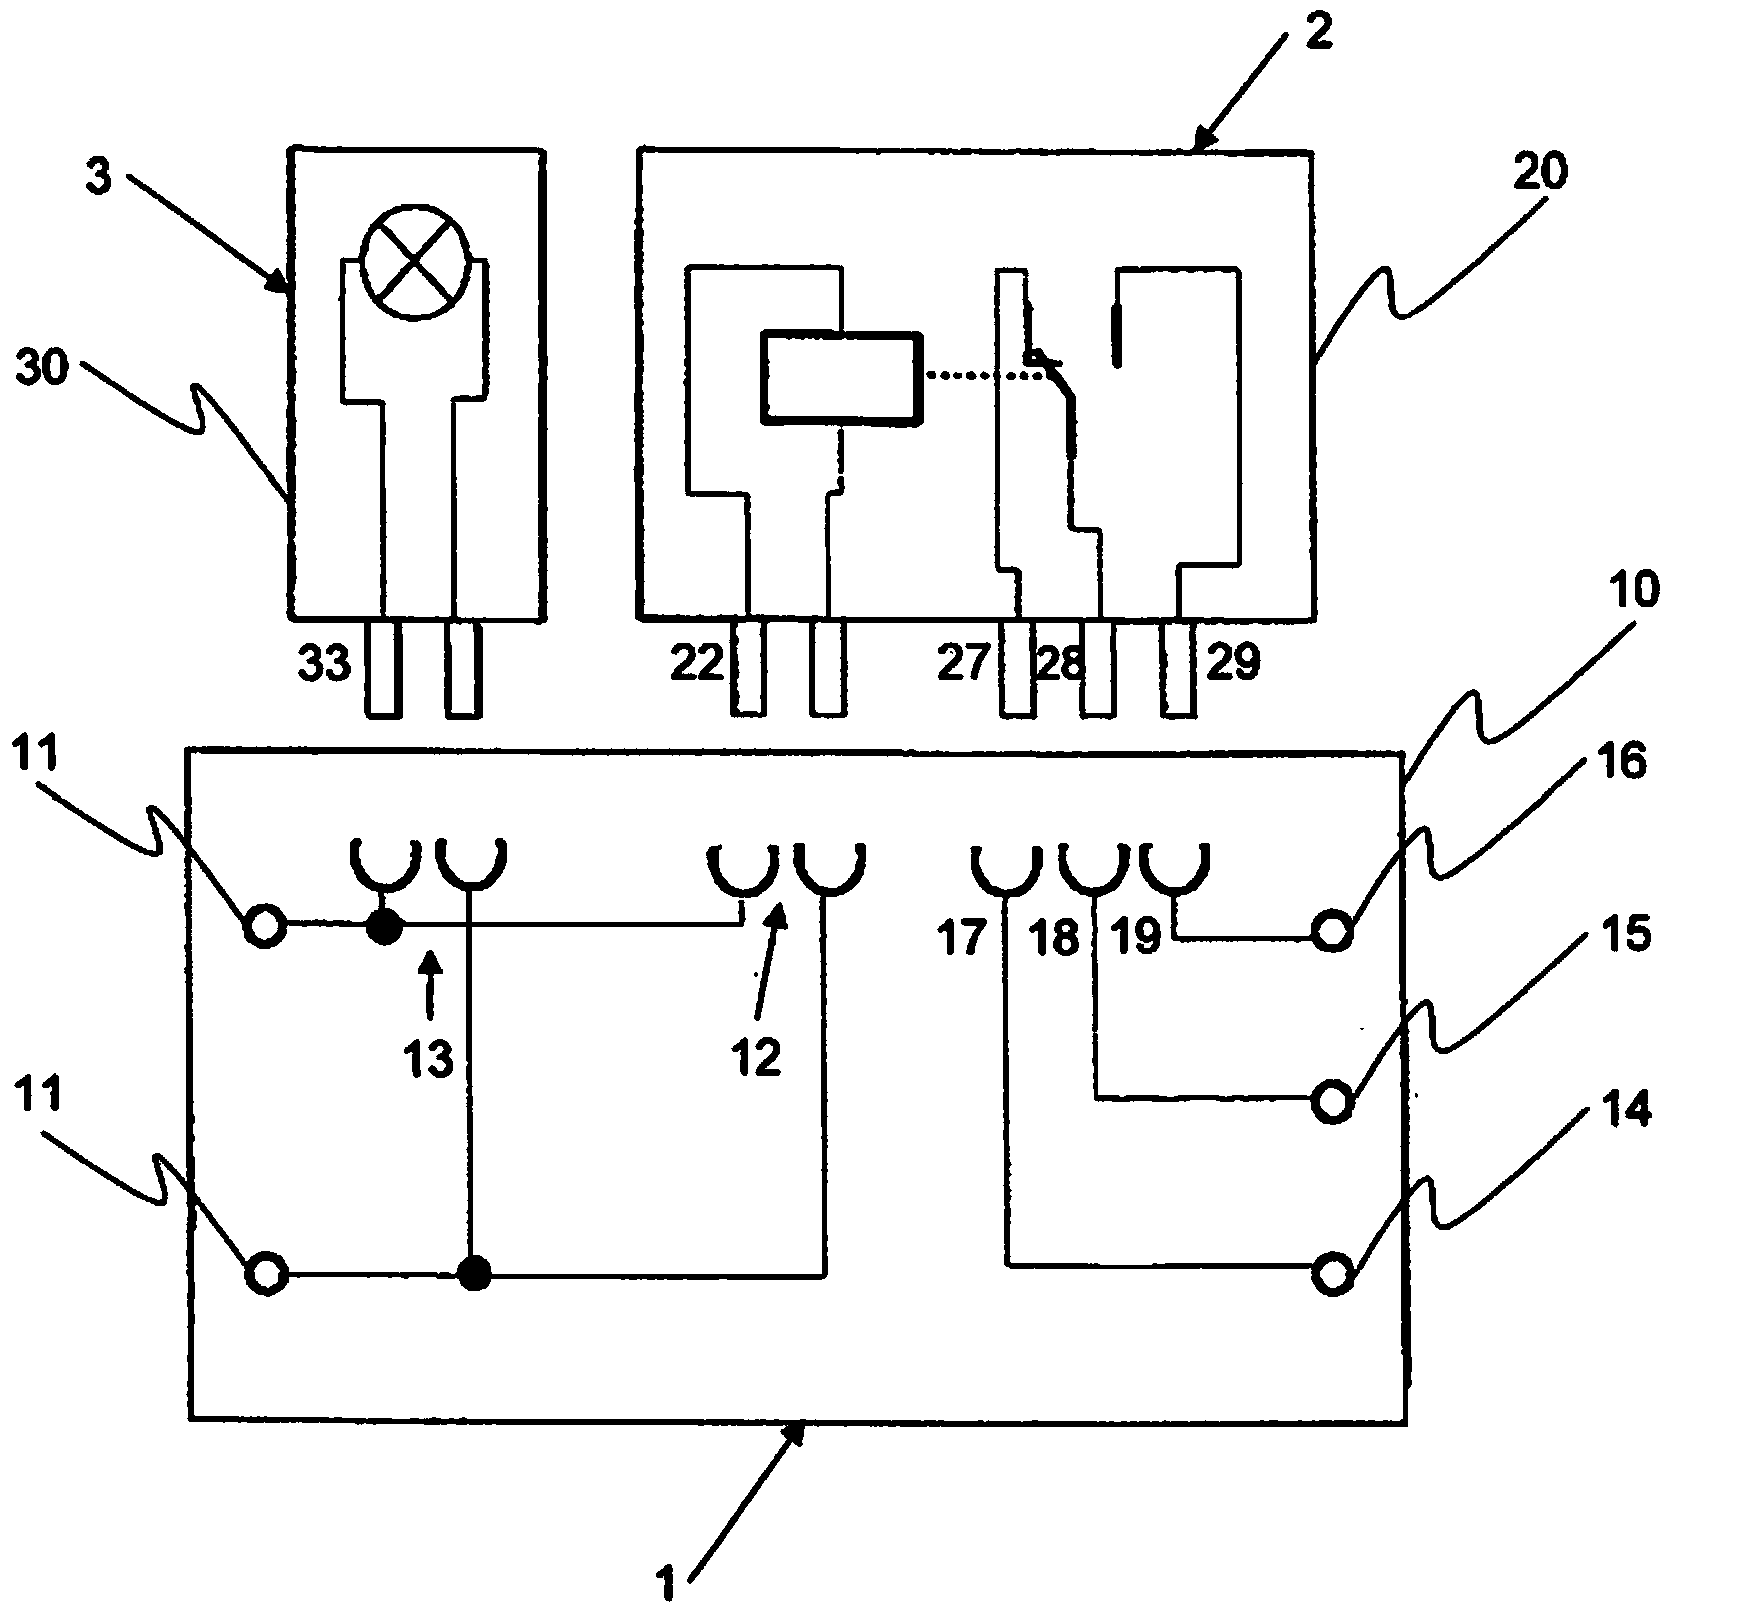 System cabling for a multiple relay arrangement